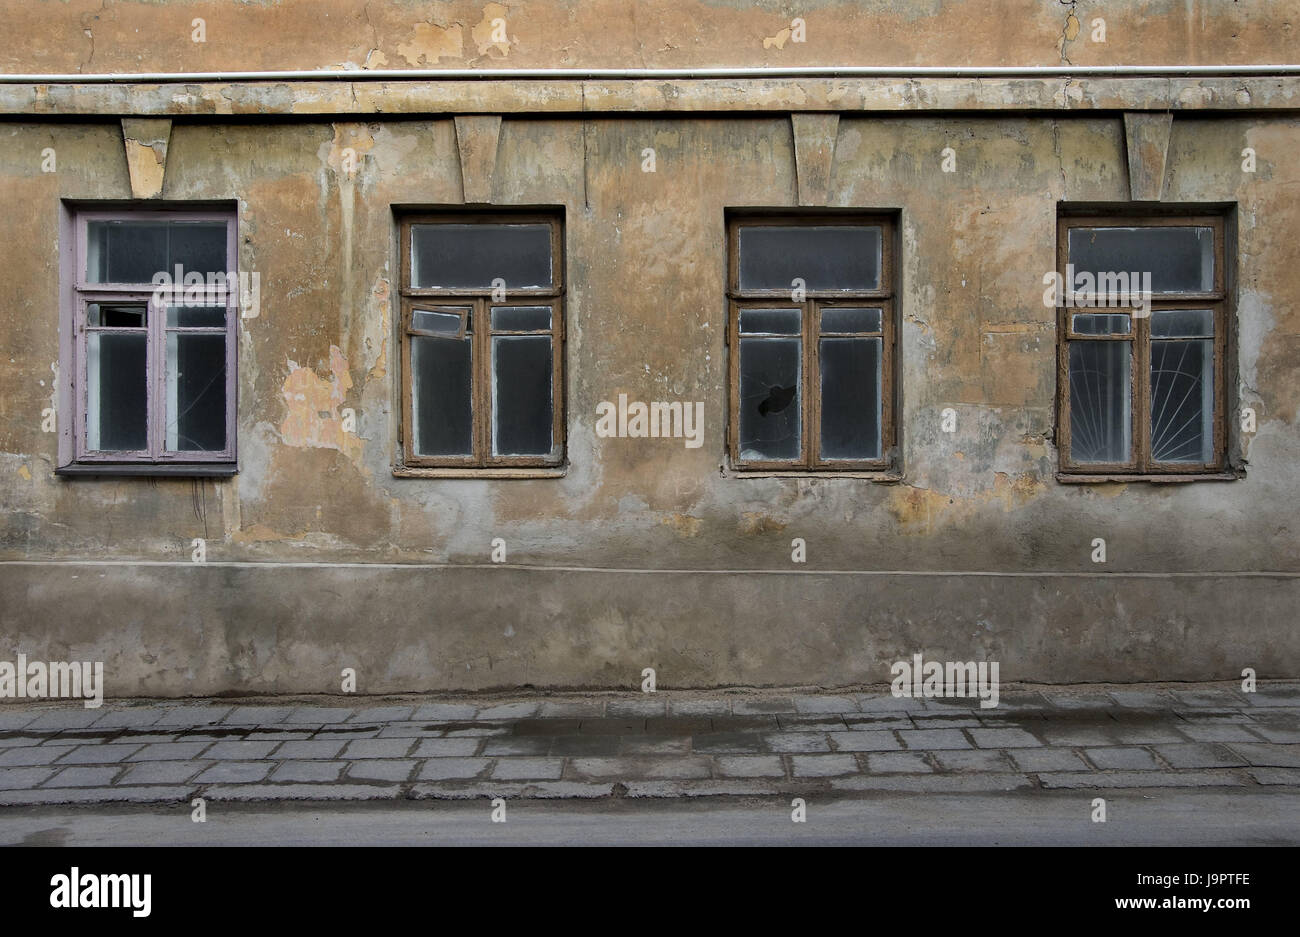 Lithuania,Vilnius,Old Town,house,old,building,empty,facade,dreary,defensive wall,window,sidewalk,street,cracks,weather-beaten,exit,neglected,dilapidatedly,slice,broken,architecture,oblivion,recollections,loneliness,melancholia,past,stagnation,vacuousness,nobody,outside, Stock Photo